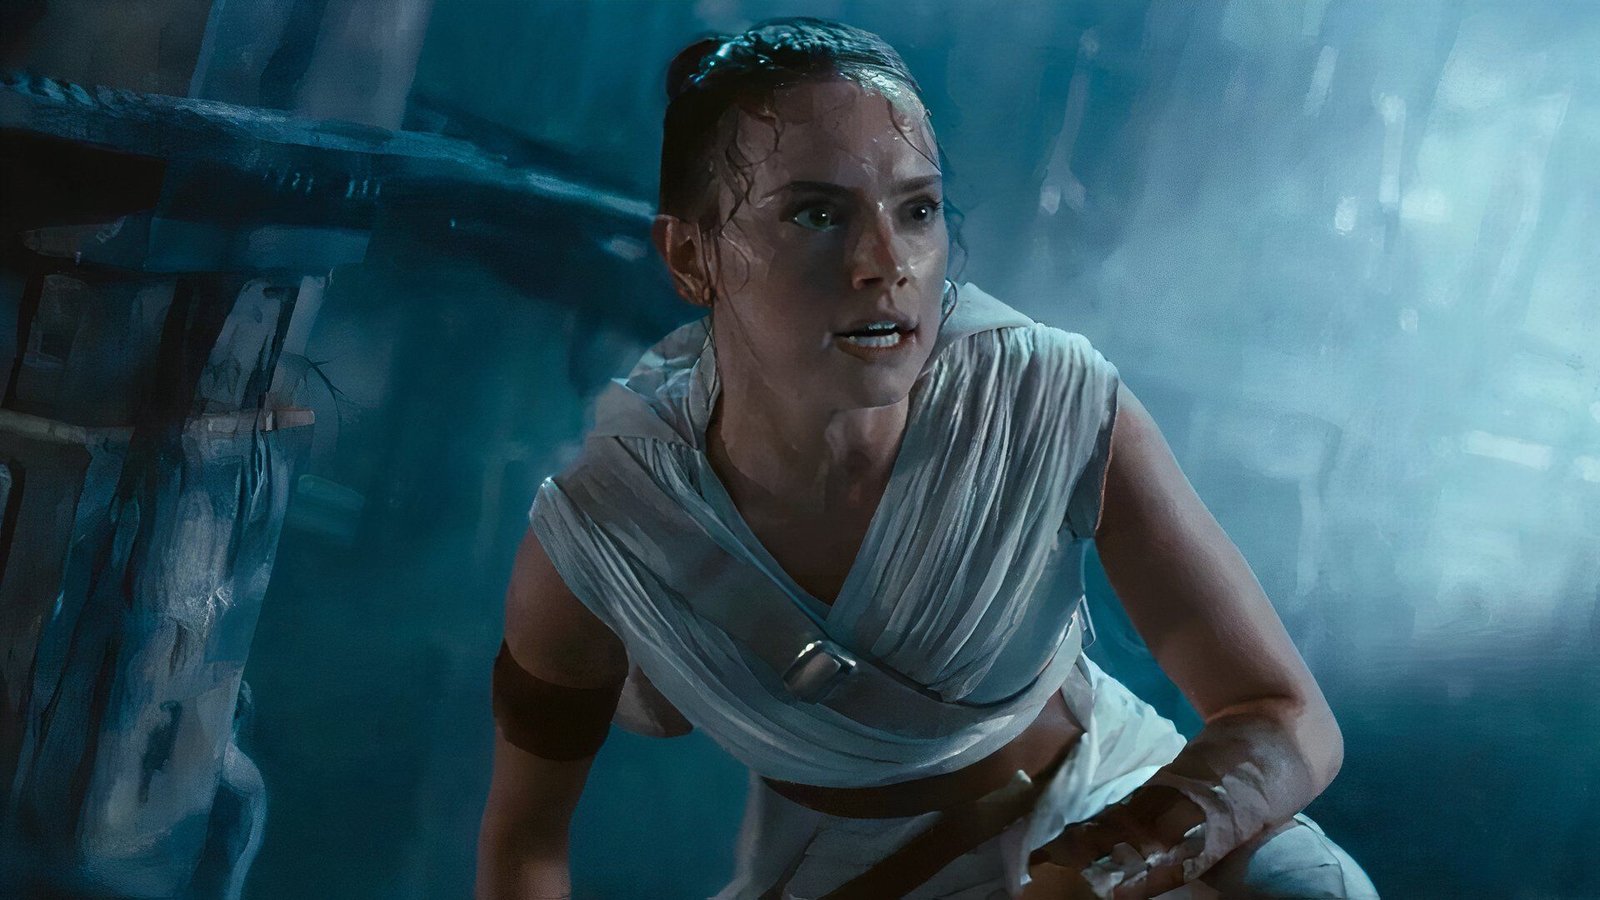 New Jedi Order Director Breaks Silence on Rey Skywalker Sequel and George Lucas Discussions